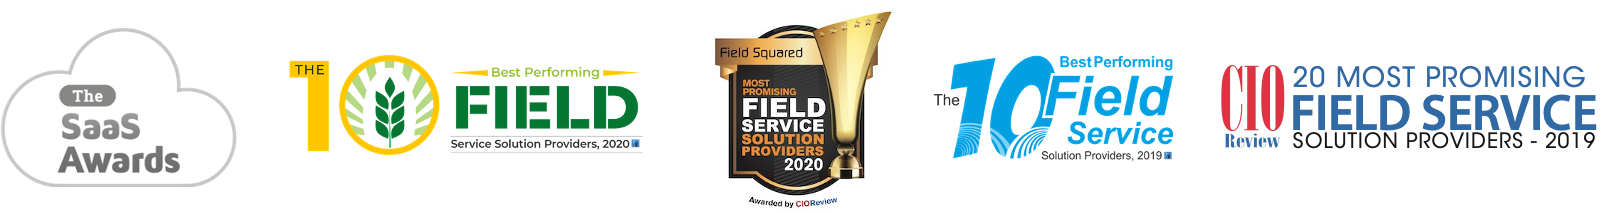 field-squared-industry-awards-recognition-2